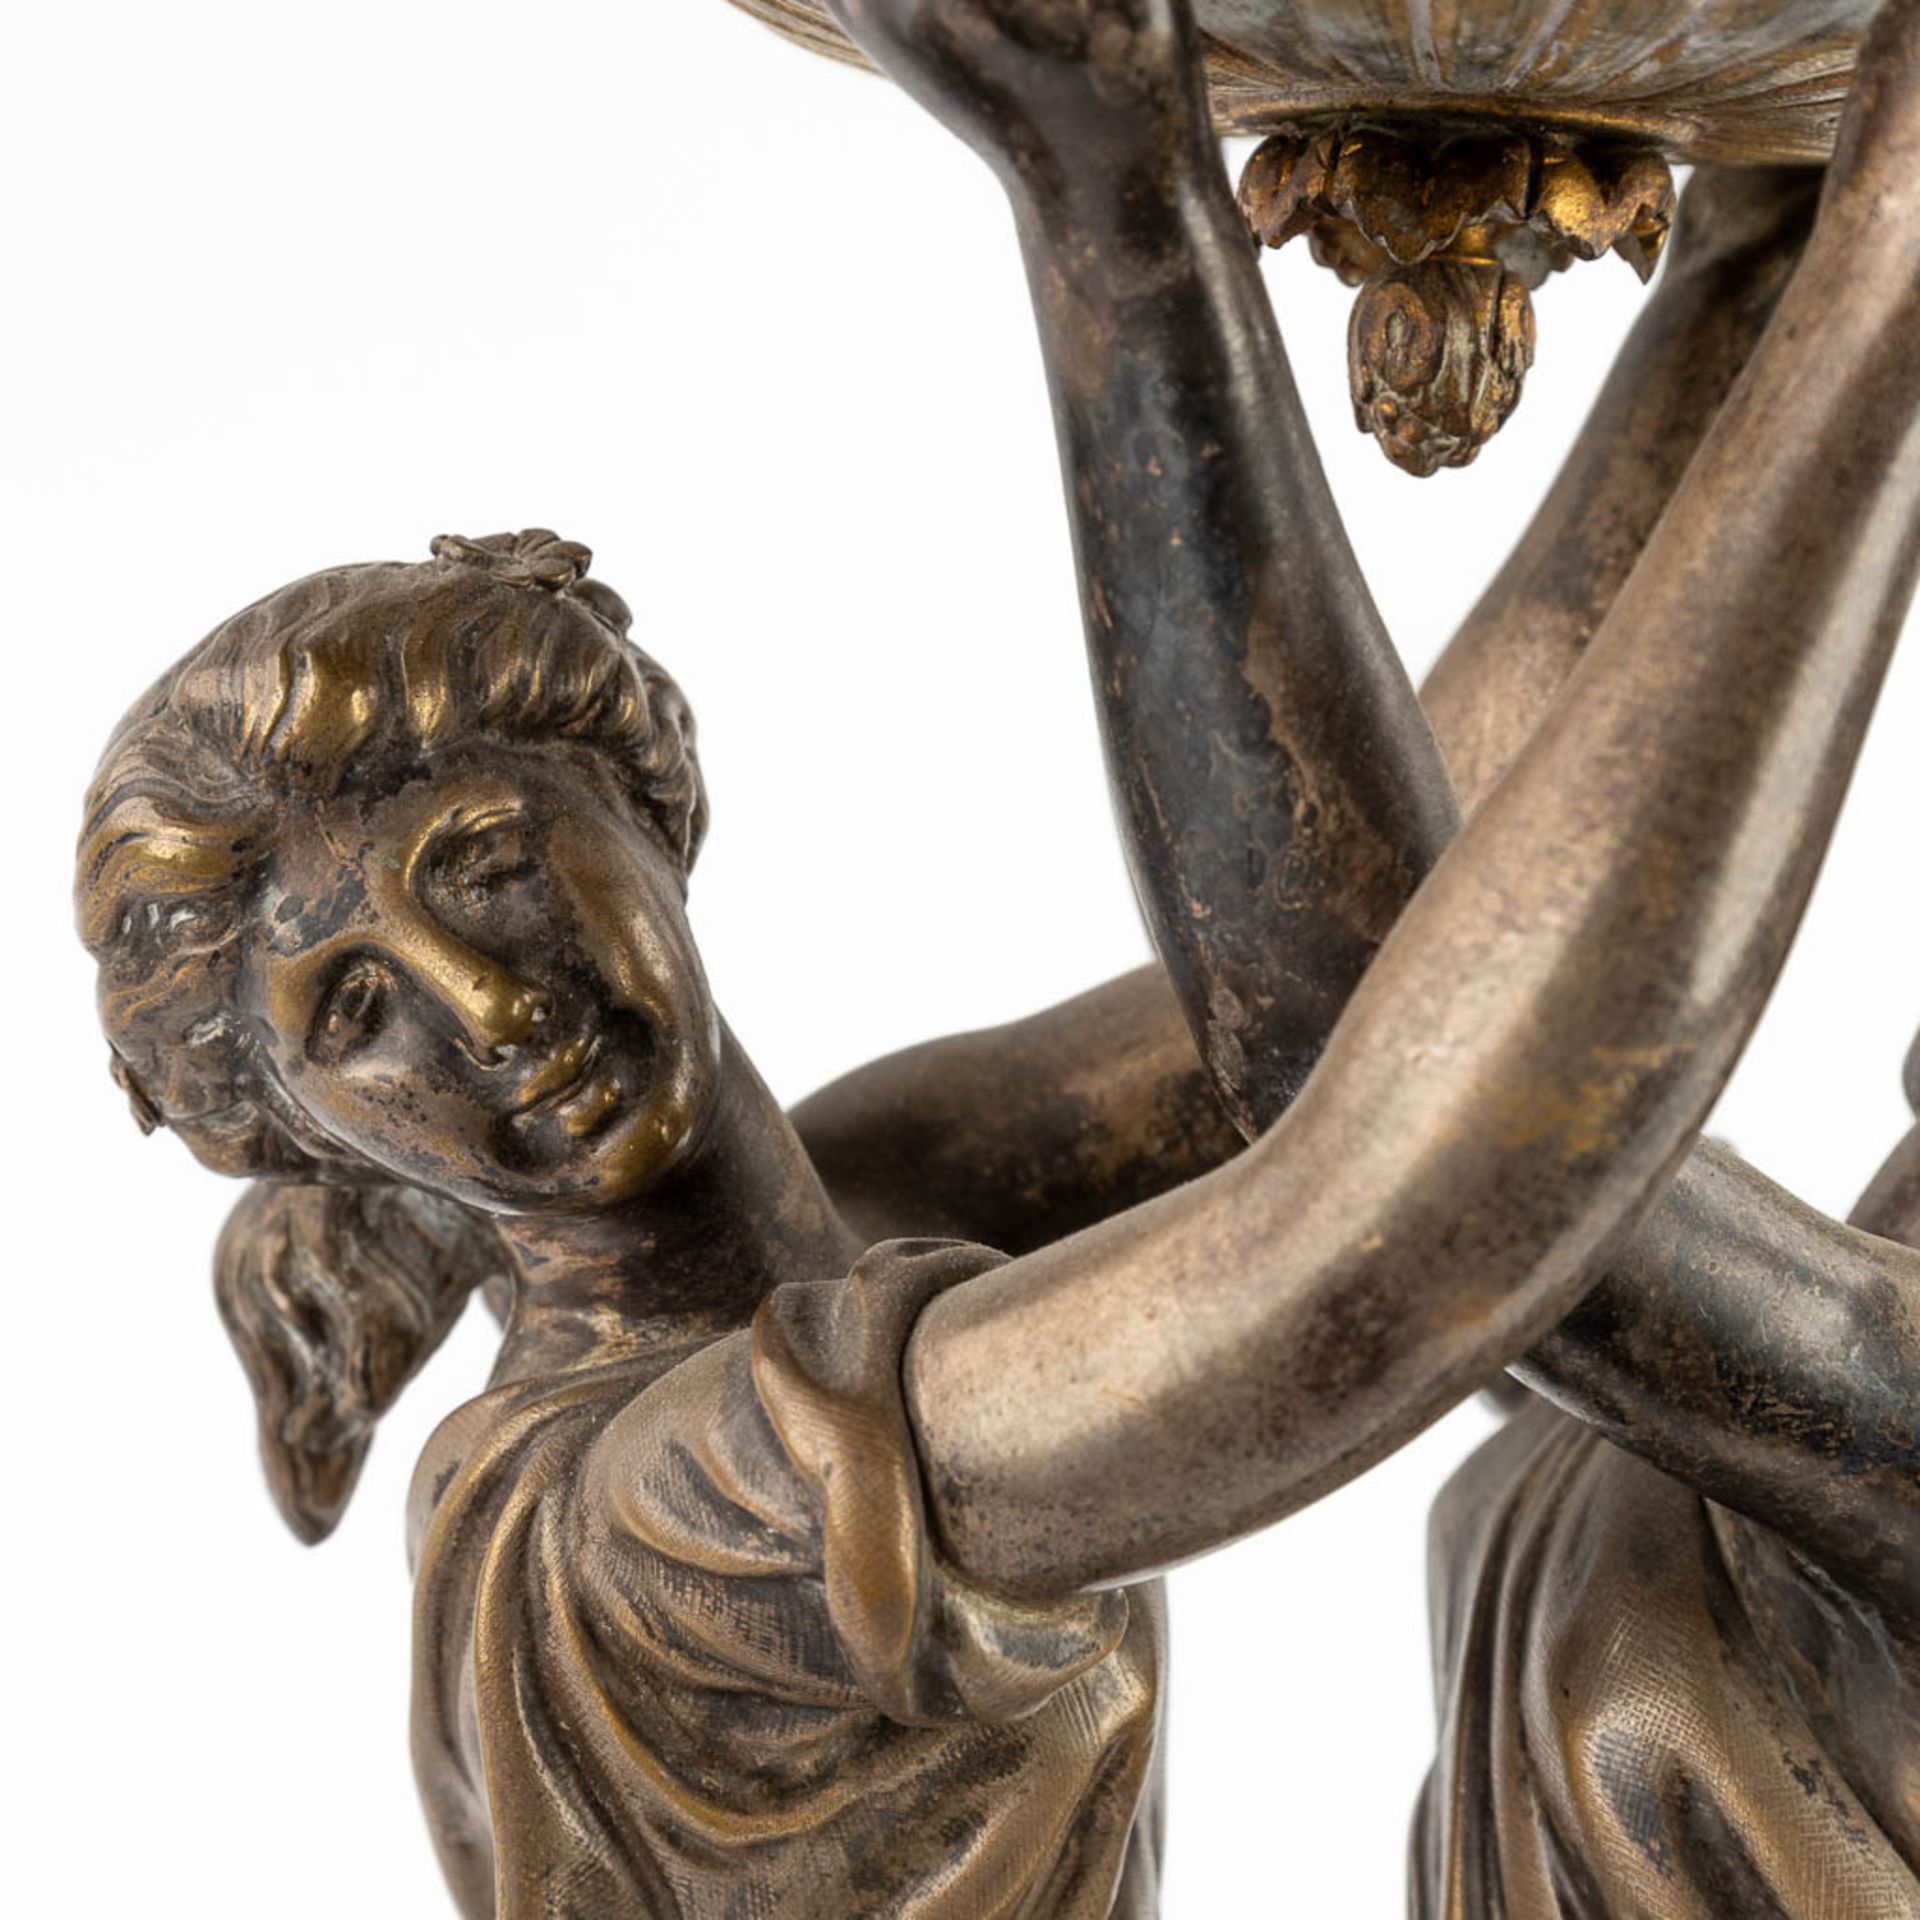 A large figurine of two graces, silver-plated and polished bronze. 19th C. (D:10 x W:18 x H:53 cm) - Image 9 of 11